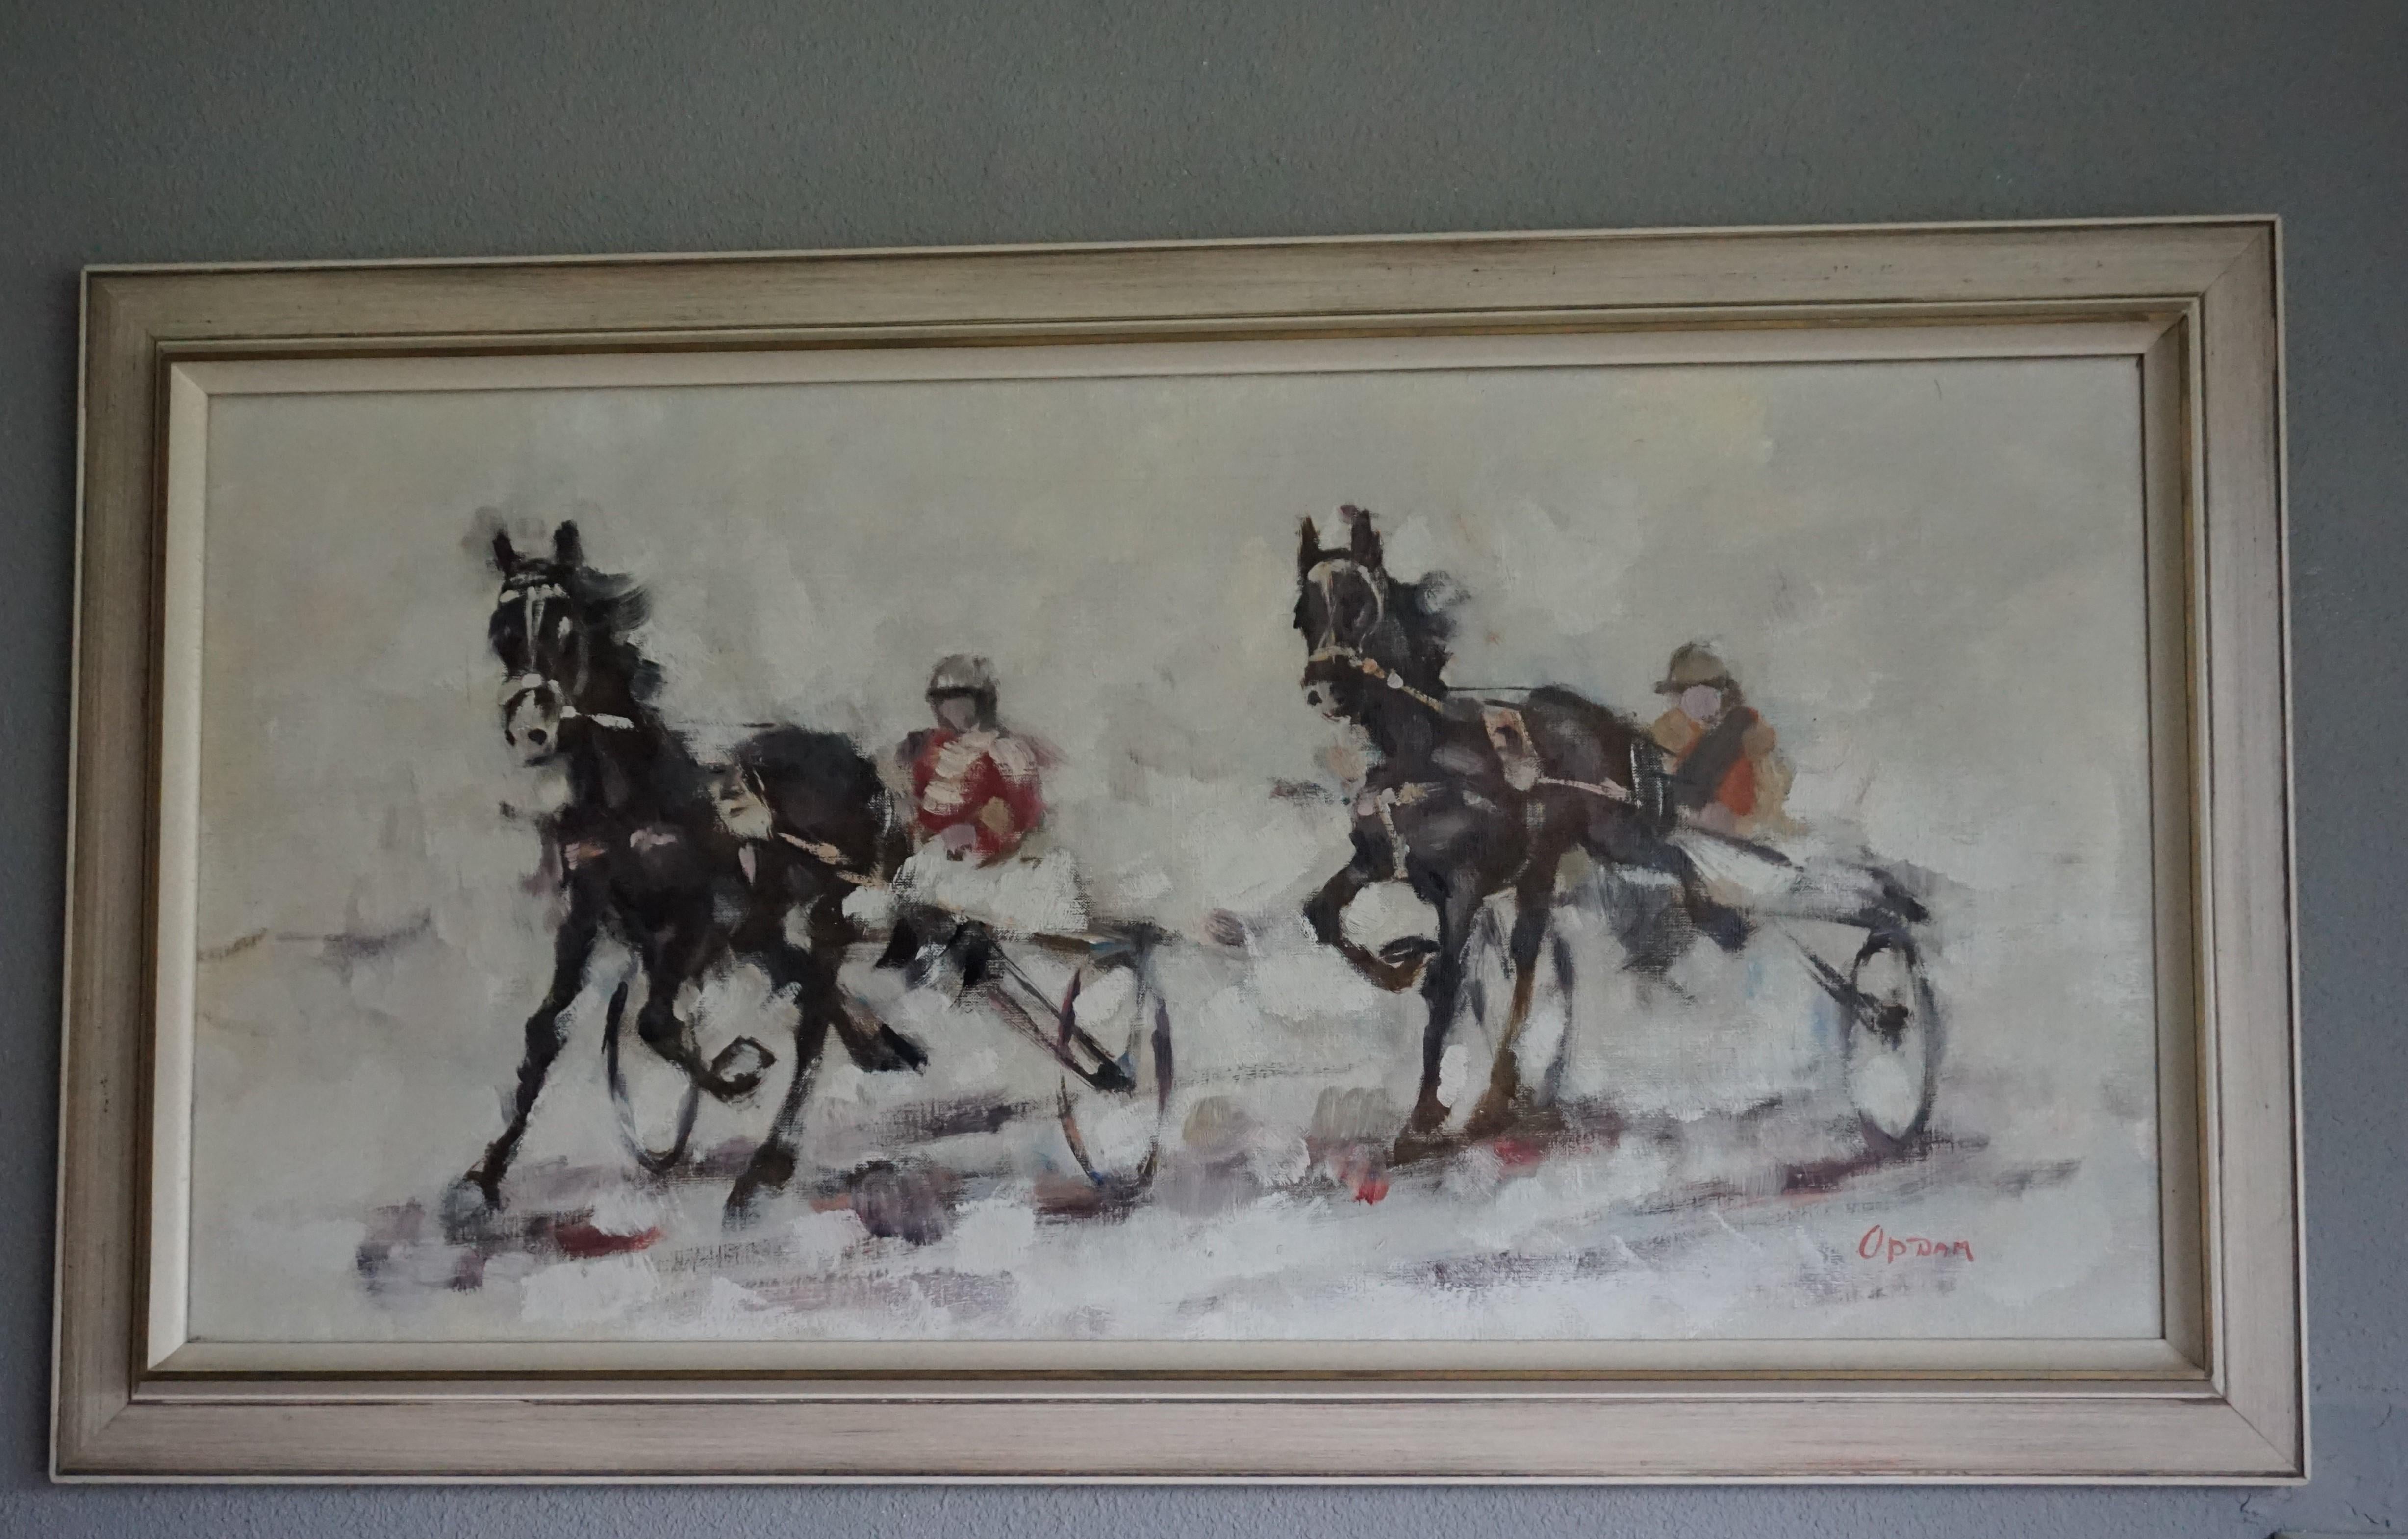 Perfect size and mint condition work of art.

This finest quality and mint condition painting is in its original frame and it could be the perfect wall art for your midcentury interior. If you love horses in general and harness/horse racing in